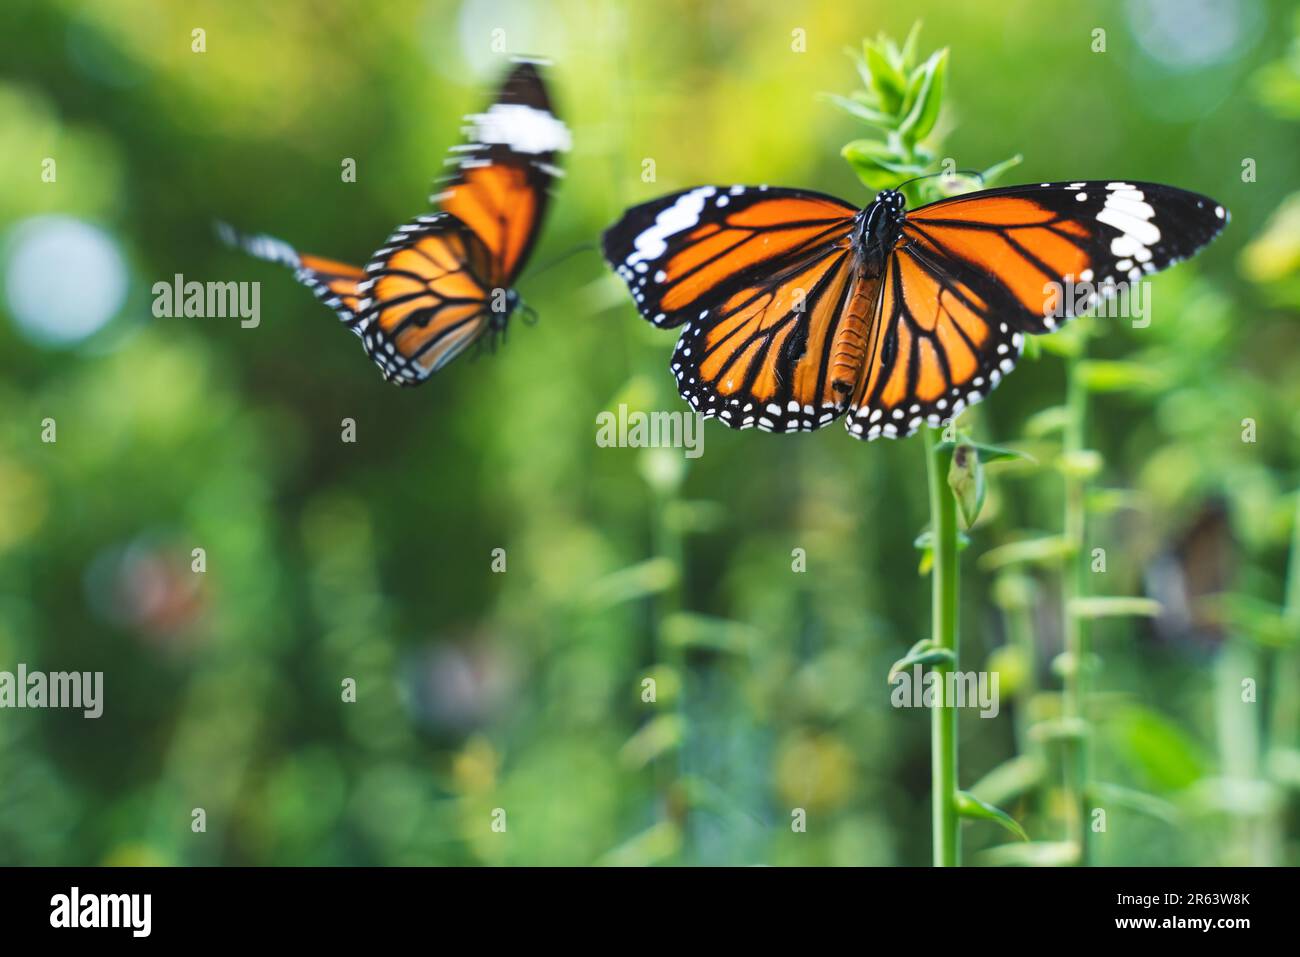 Two monarch butterflies, Danaus plexippus, sitting on green plant and flying with motion blur, Thailand Stock Photo